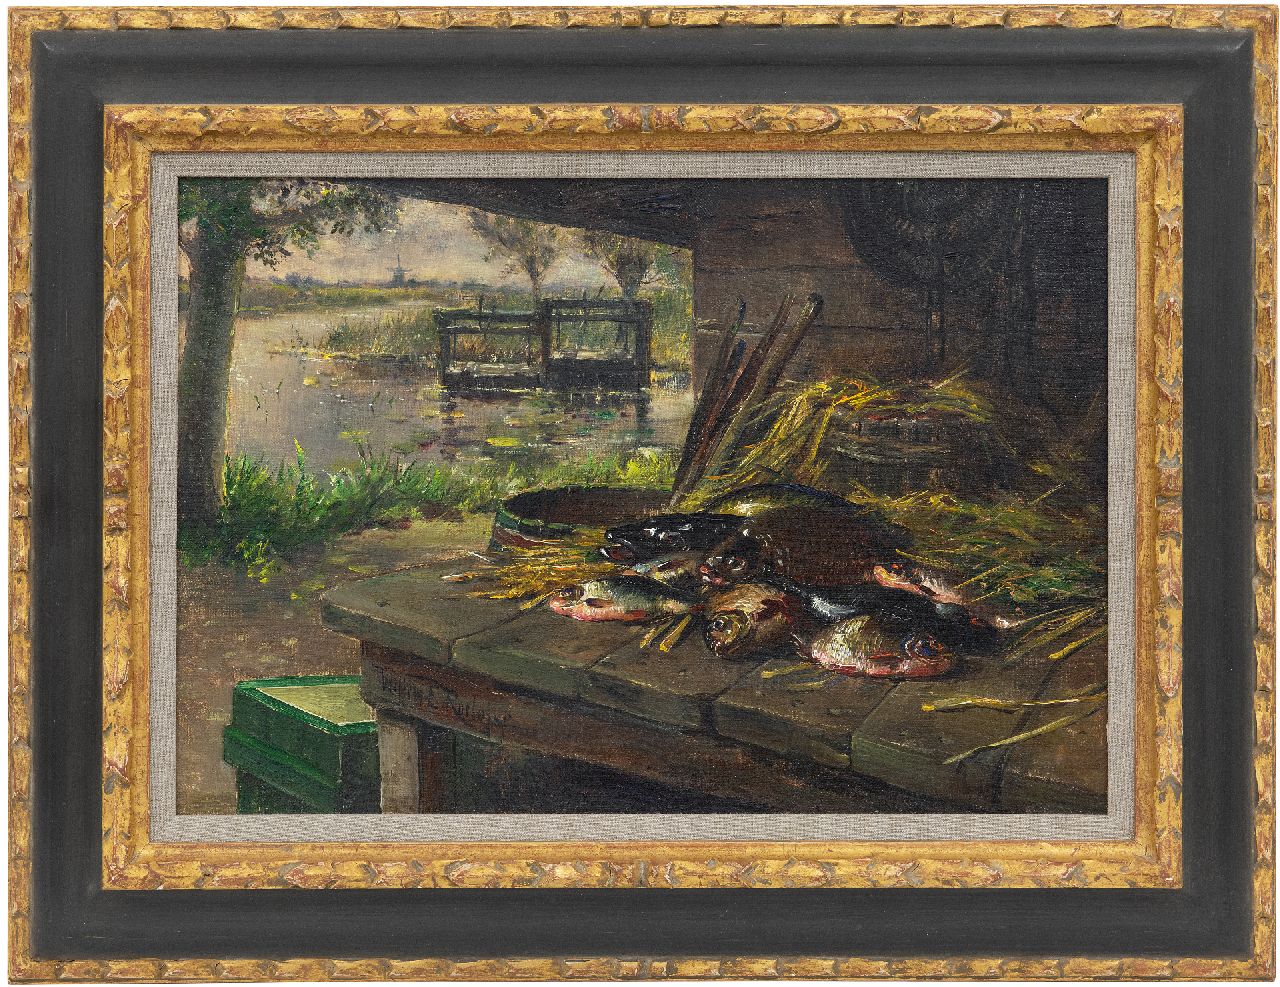 Roelofs jr. W.E.  | Willem Elisa Roelofs jr., Old fishing mine at the water's edge, oil on canvas 31.5 x 46.0 cm, signed l.l. on the table's edge